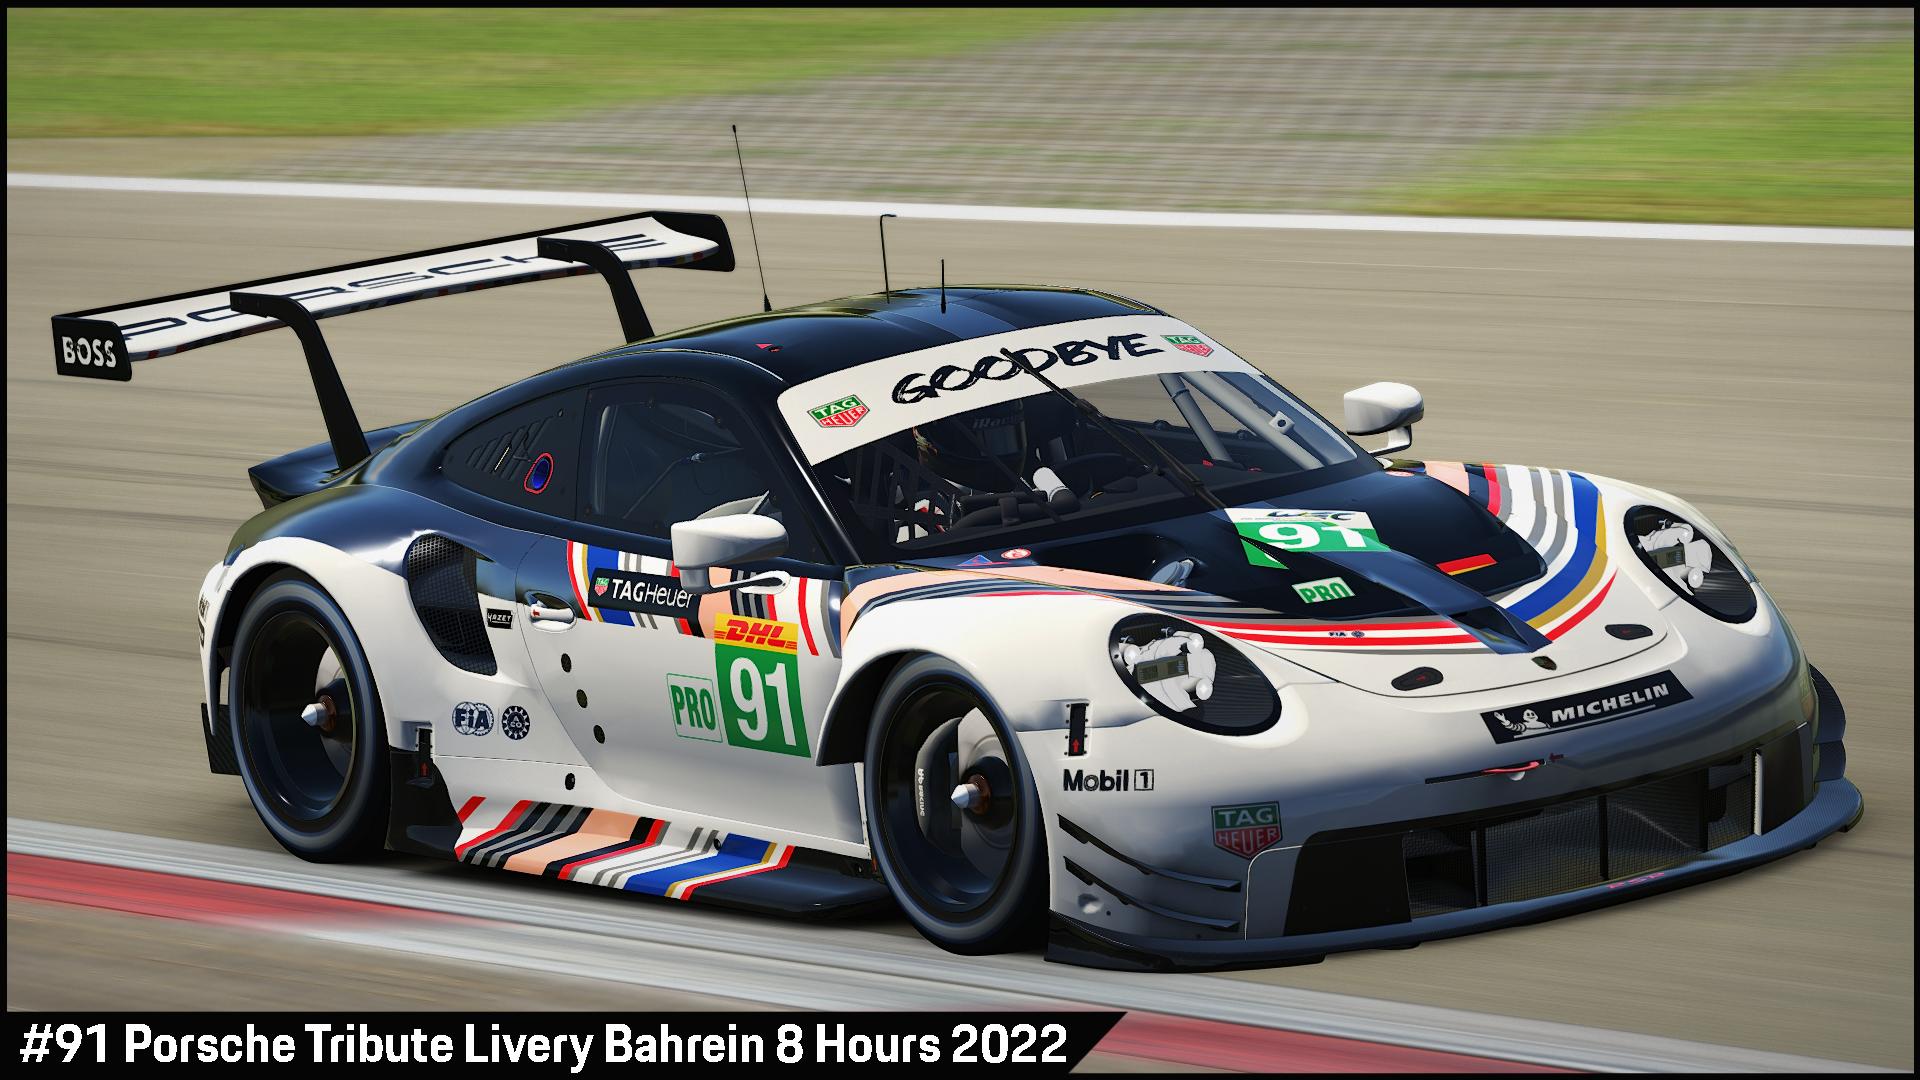 Preview of #91 Porsche Tribute Livery Bahrein 8 Hours 2022 by Sergio Hernando